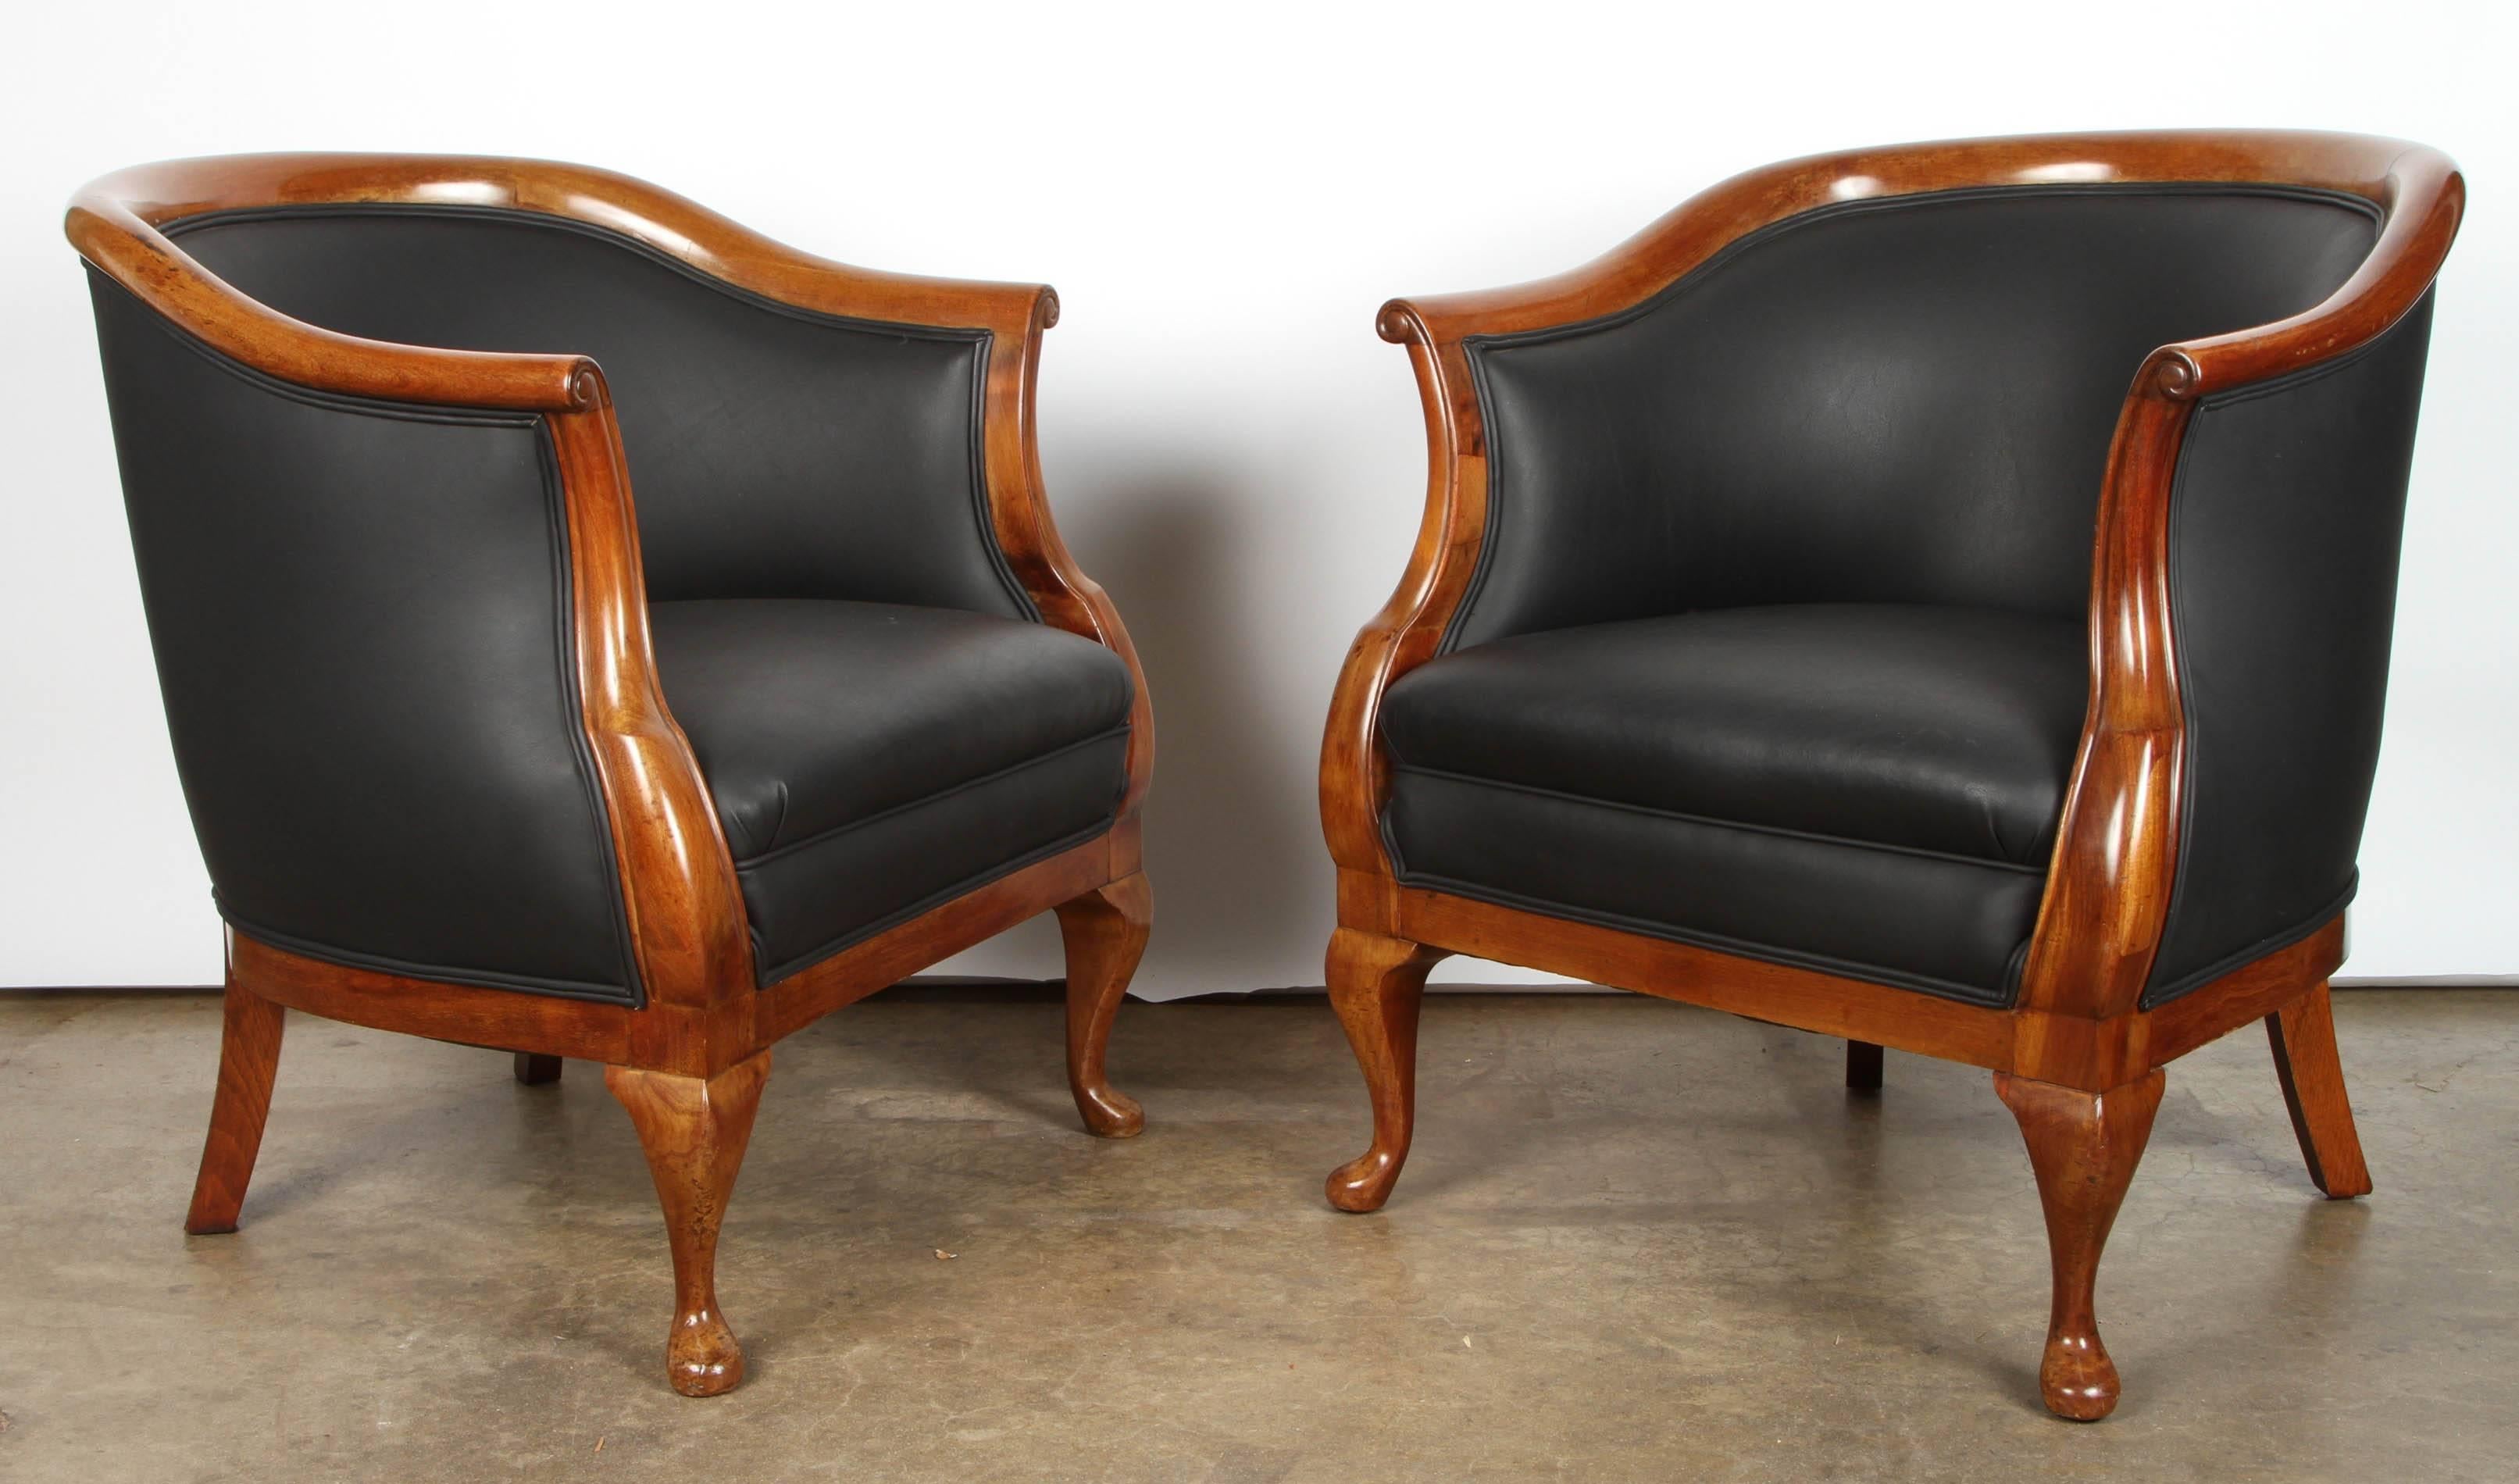 Danish mahogany armchairs with new leather upholstery, circa 1930s.